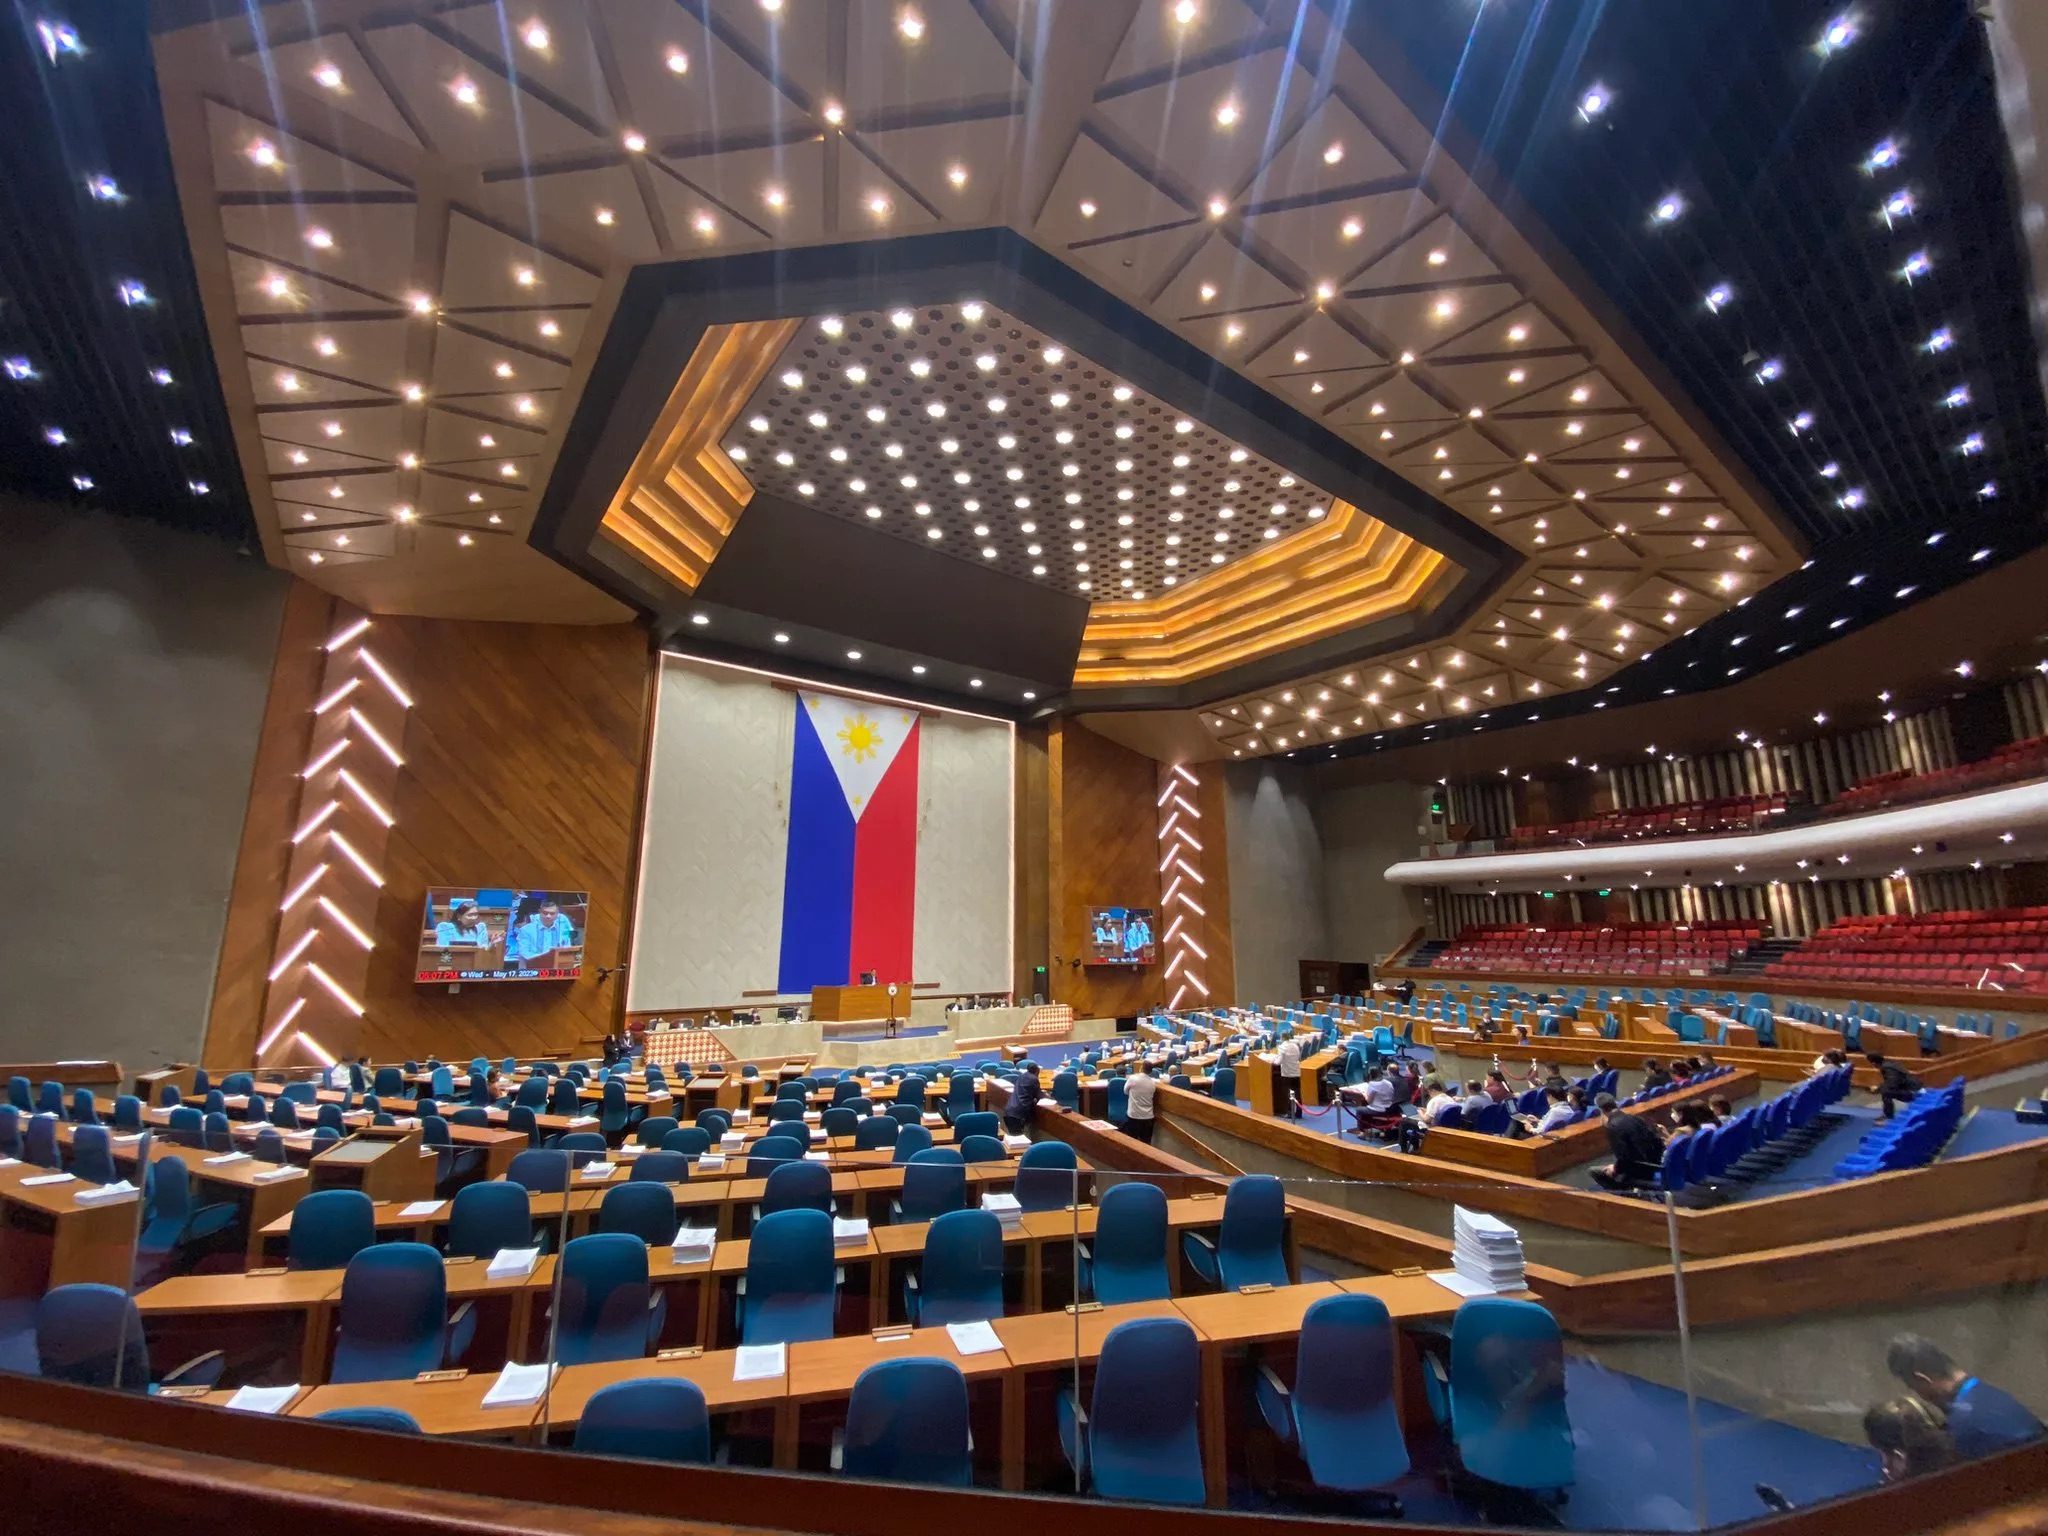 Lawmakers want to hold accountable those calling for Mindanao secession